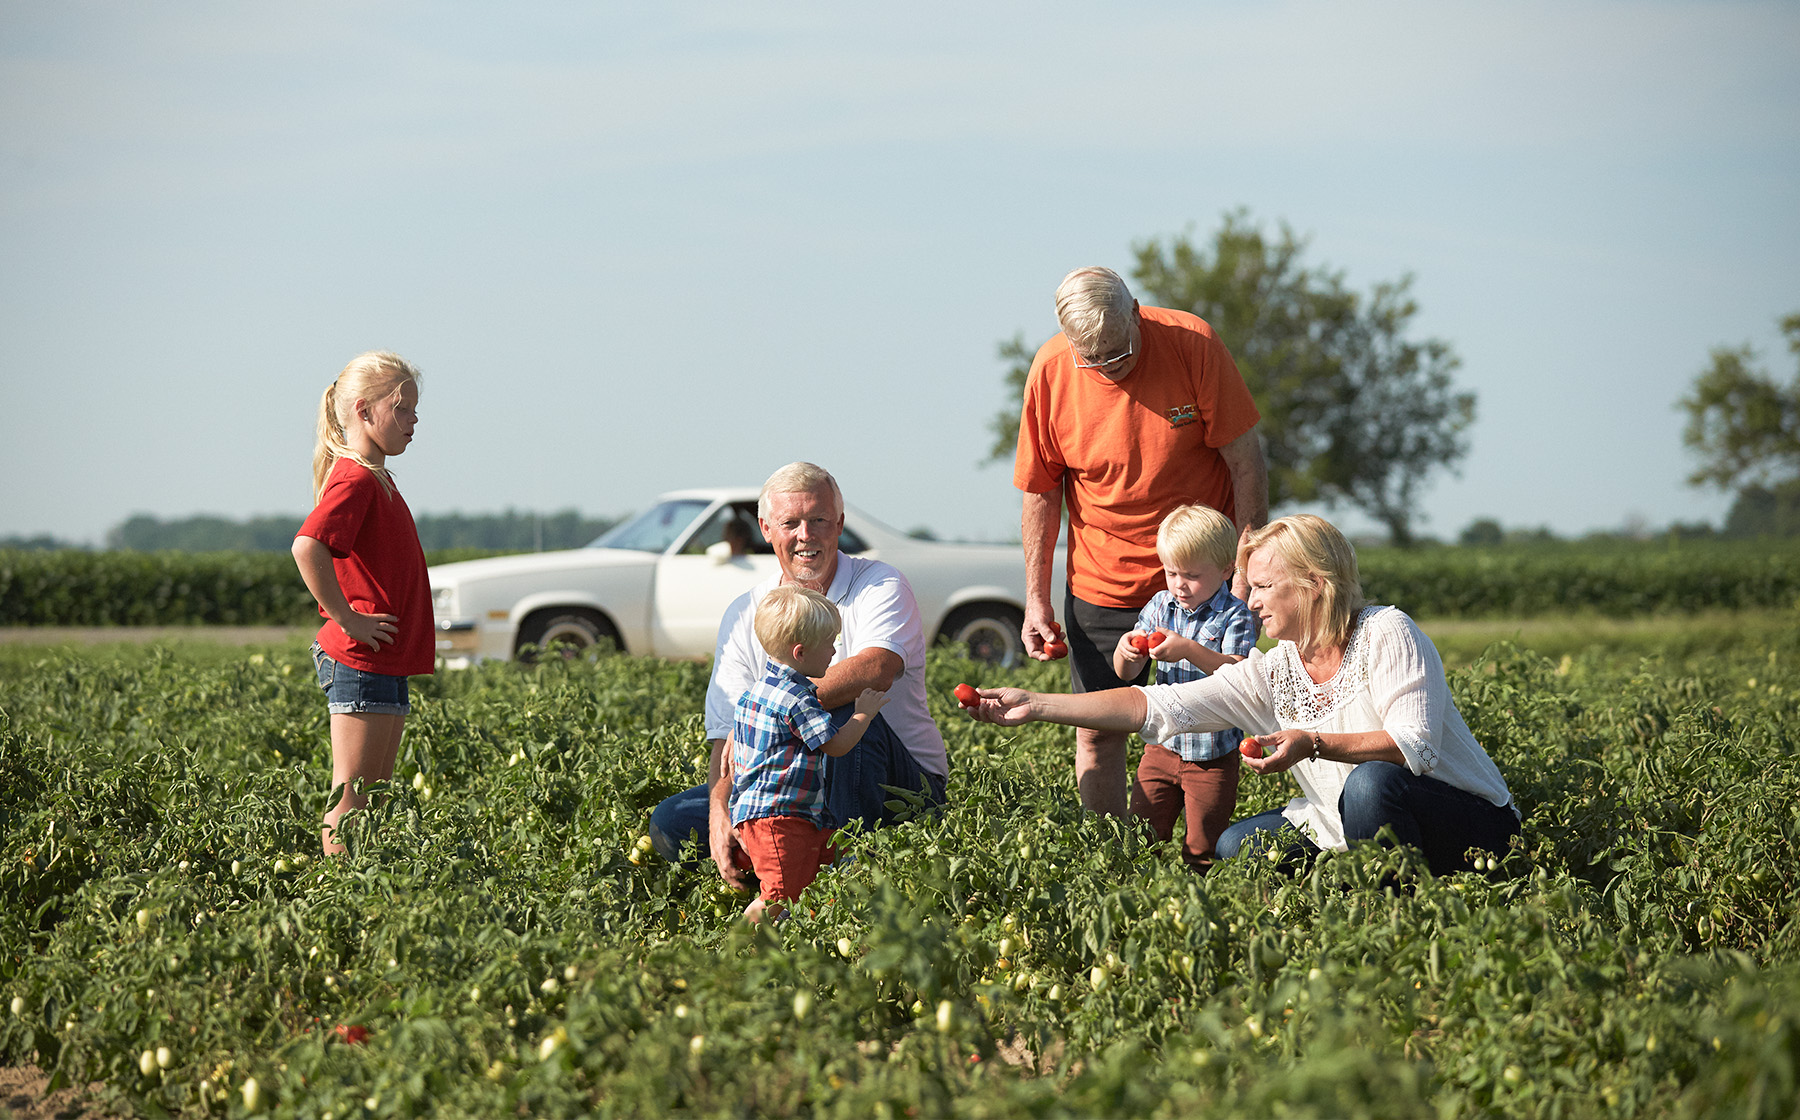 Image of Keesling Farms Growers for Red Gold Tomatoes Kim Keesling handing tomato from tomato field to small child with other grandchildren